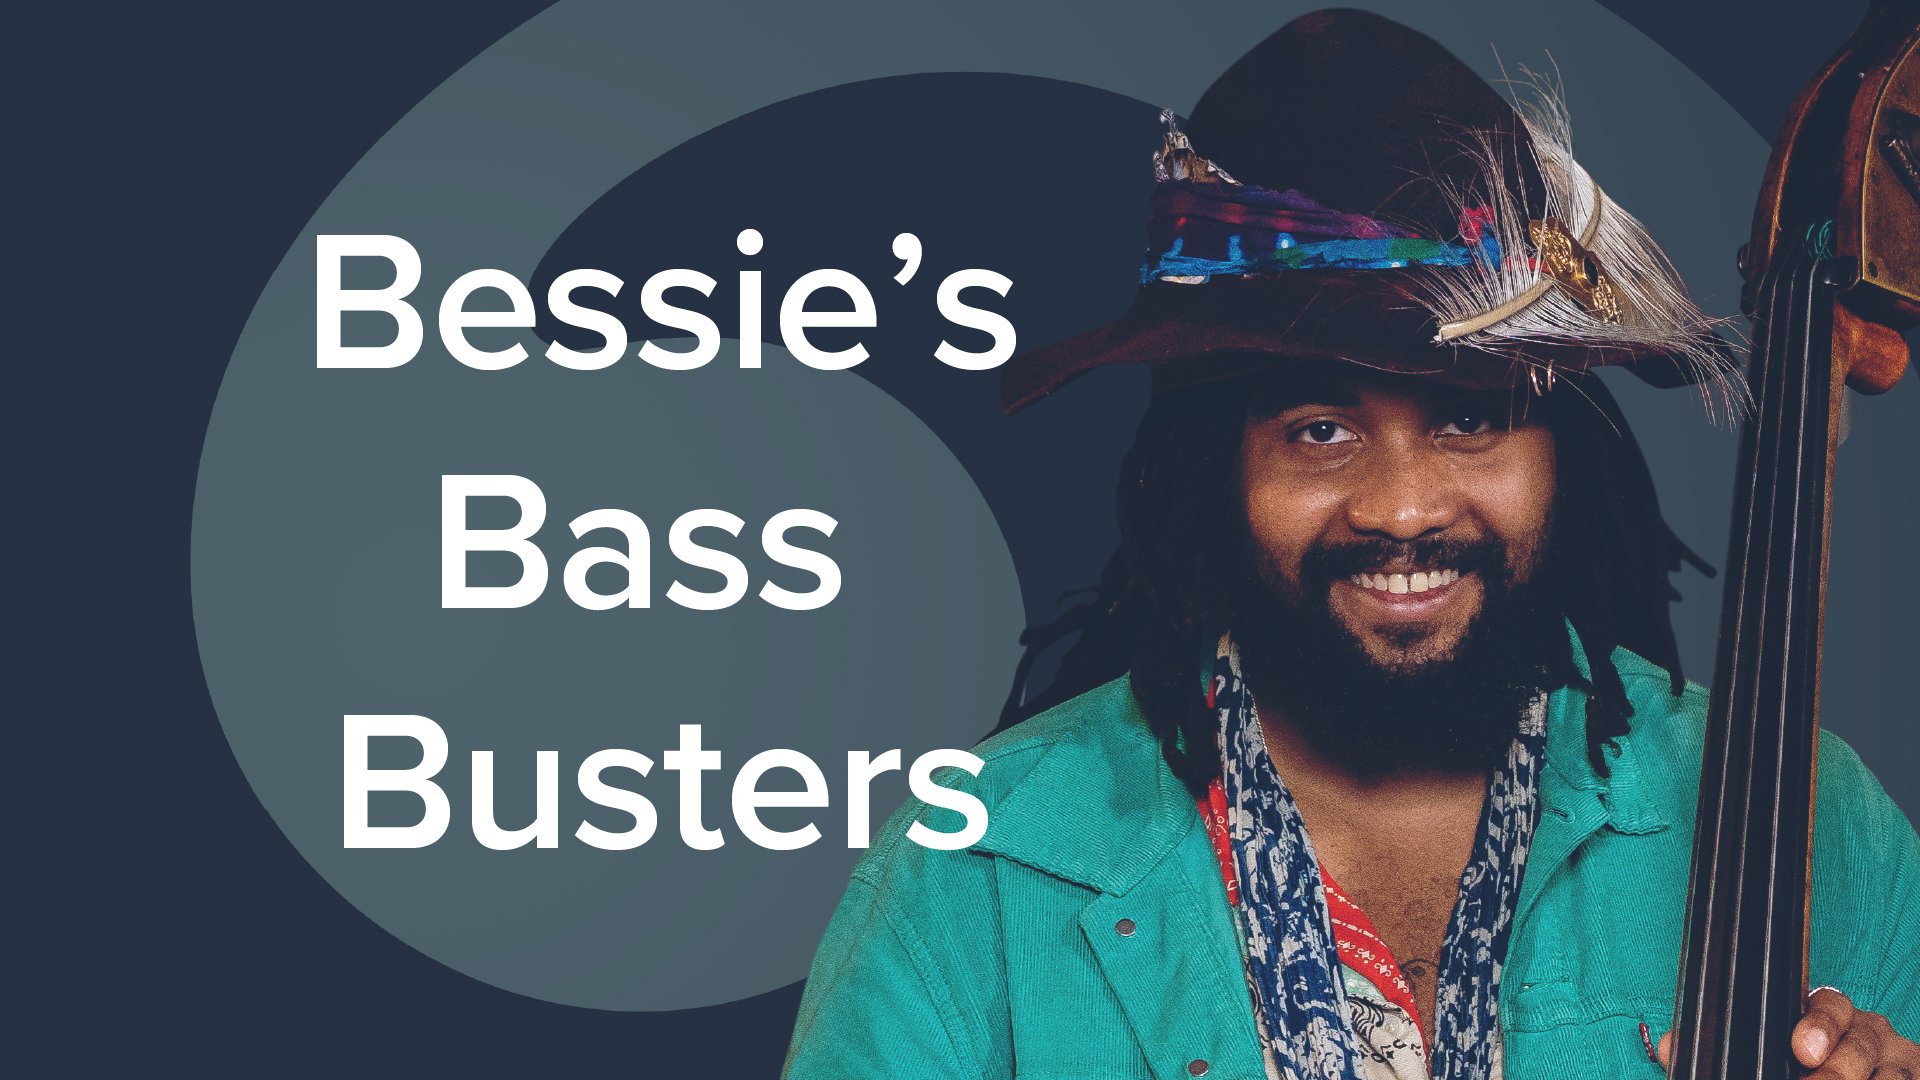 Bessie's Bass Busters